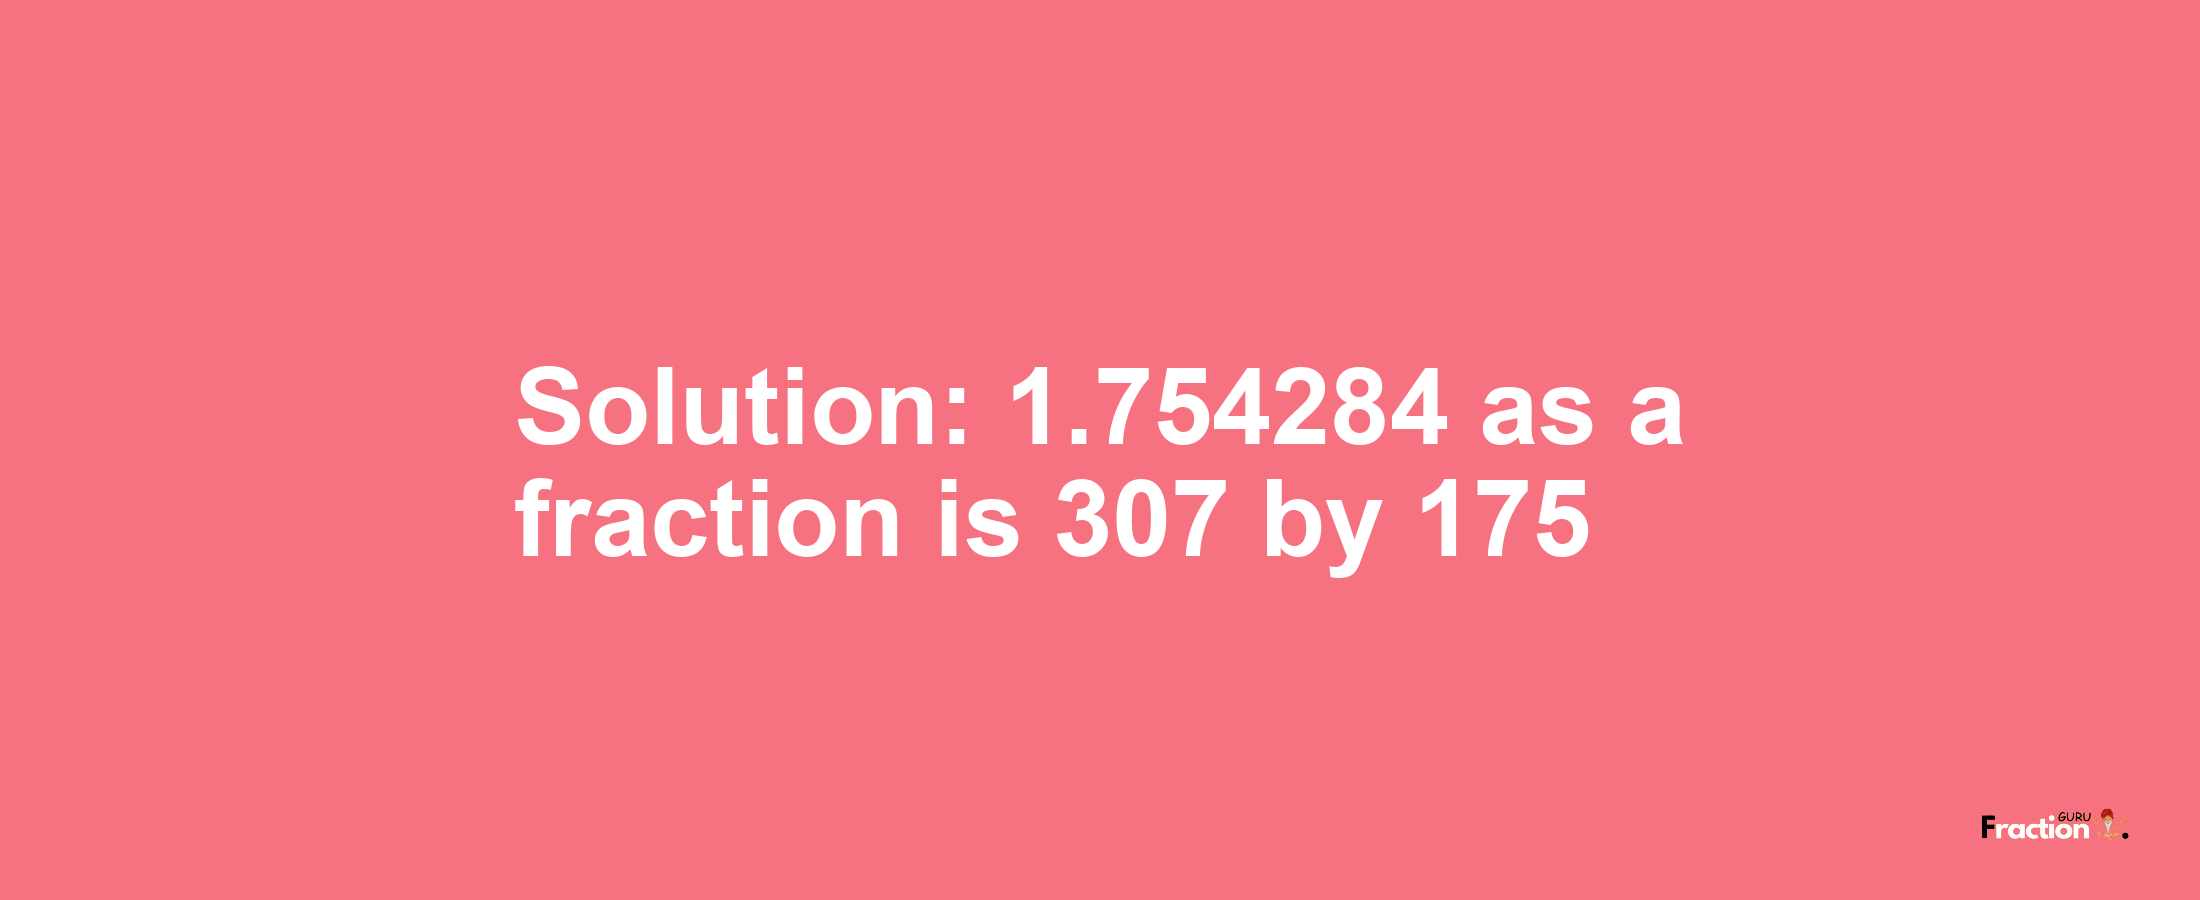 Solution:1.754284 as a fraction is 307/175